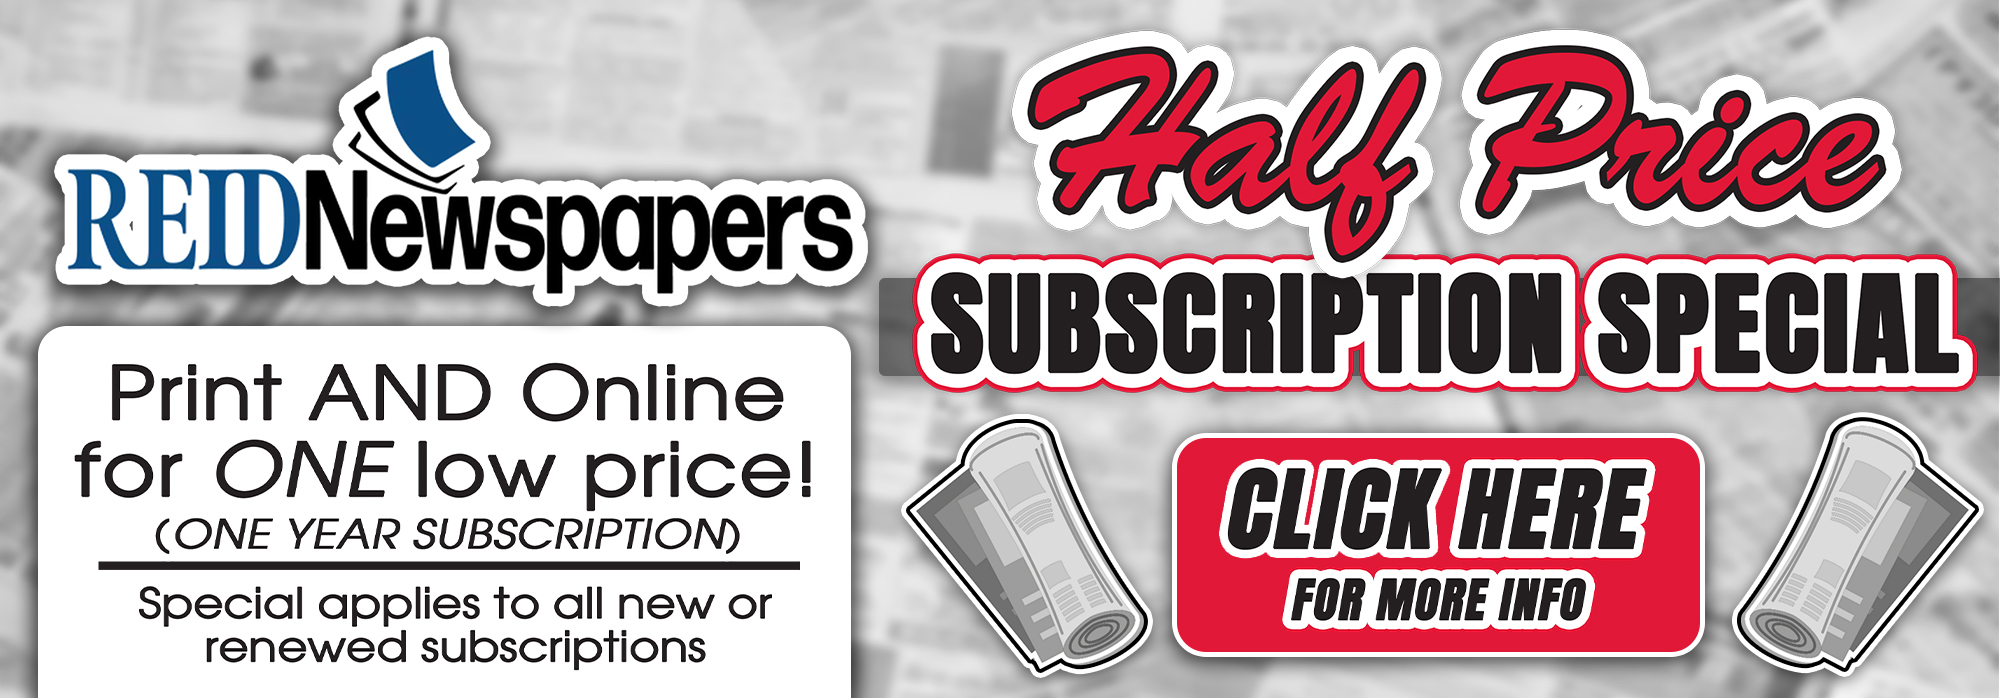 July Half Price Subscription Special